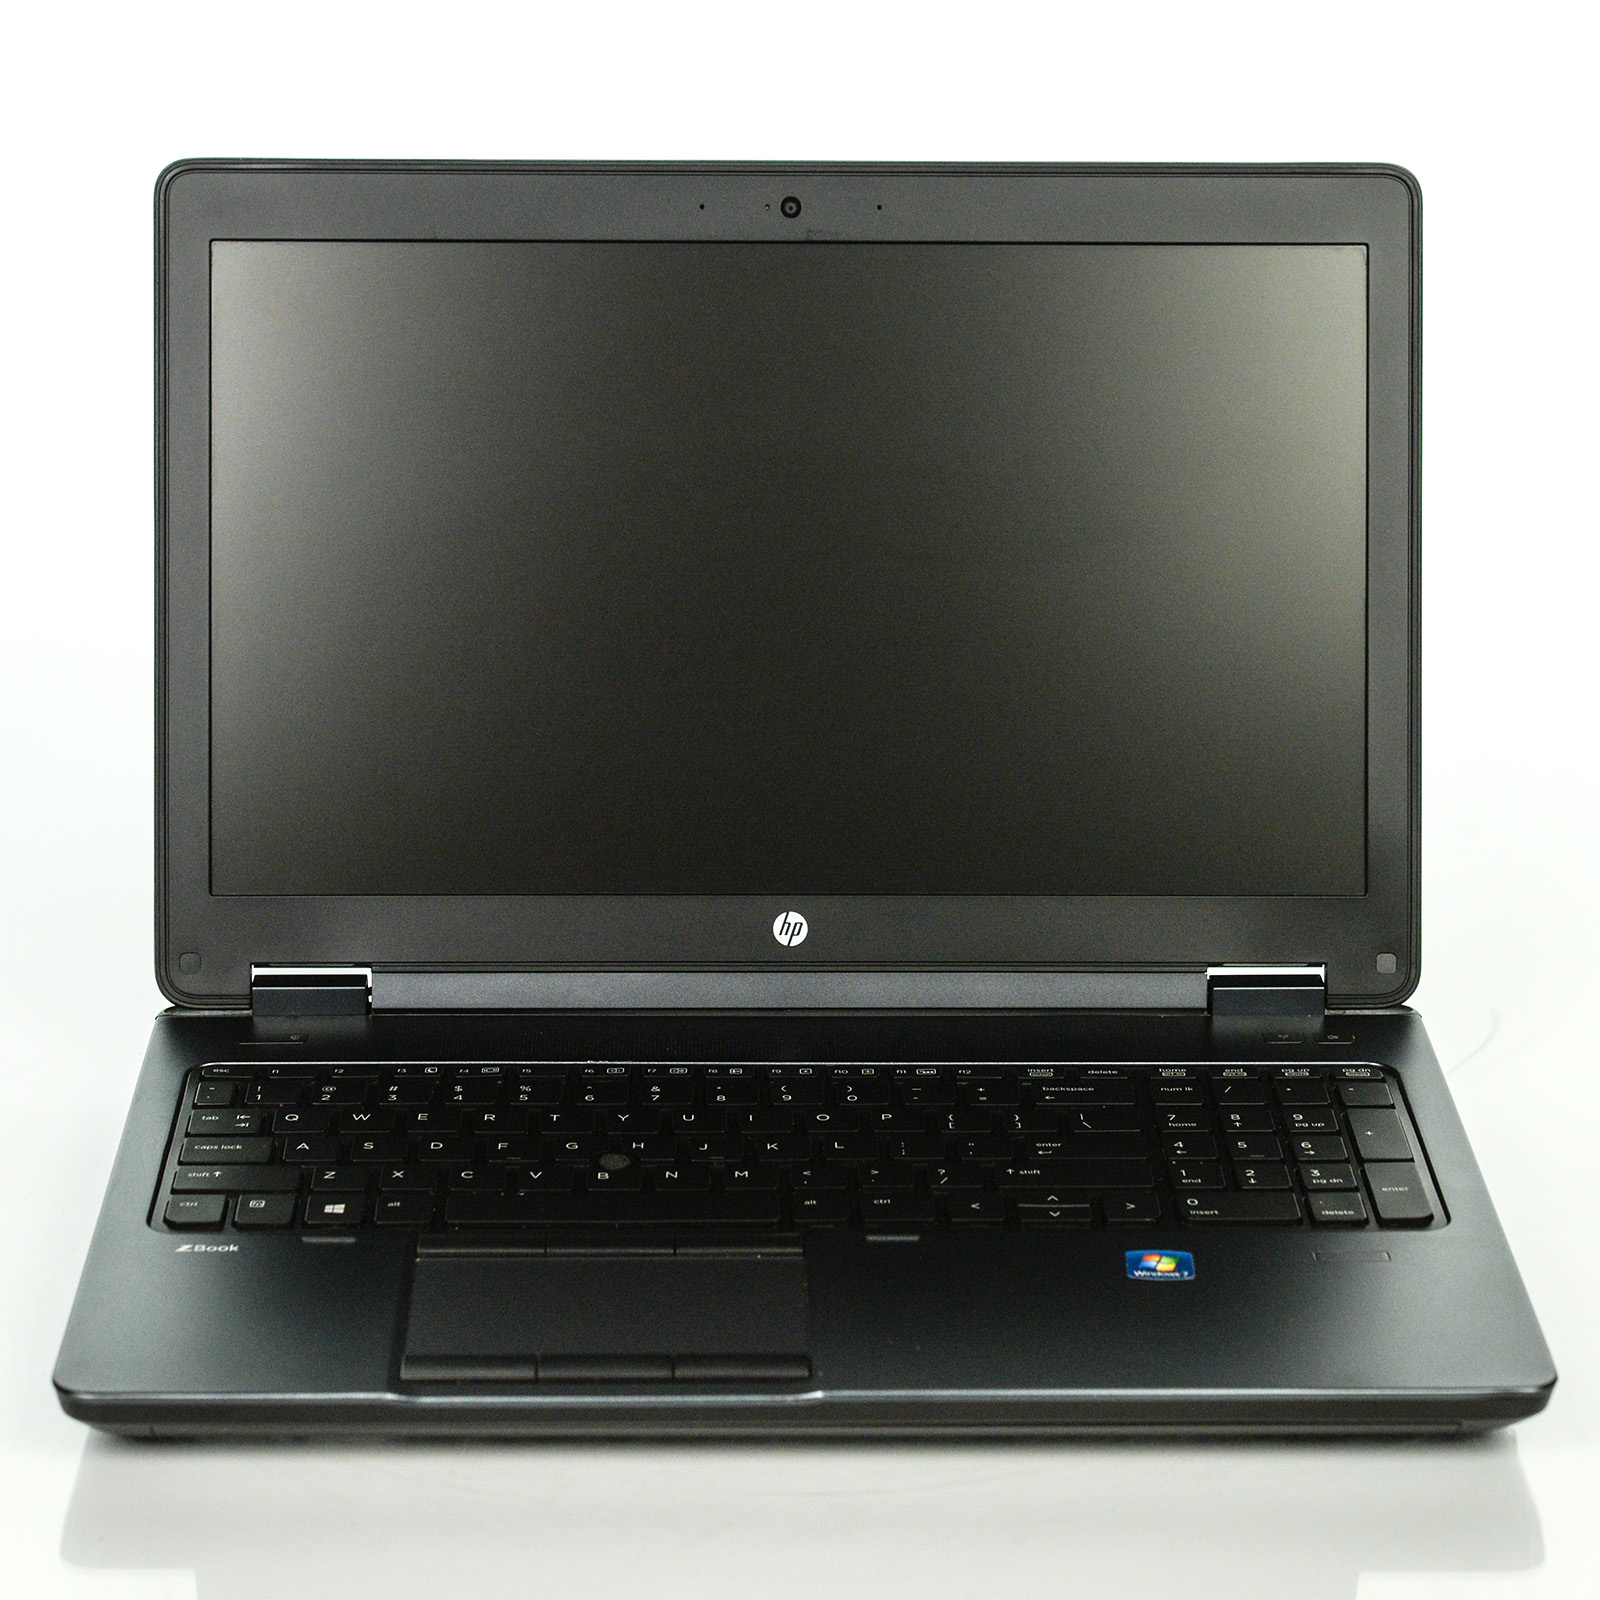 Used HP Zbook 15 Laptop i7 Quad-Core 8GB 128GB SSD Win 10 Pro 1 Yr Wty A v.WCB - image 2 of 7